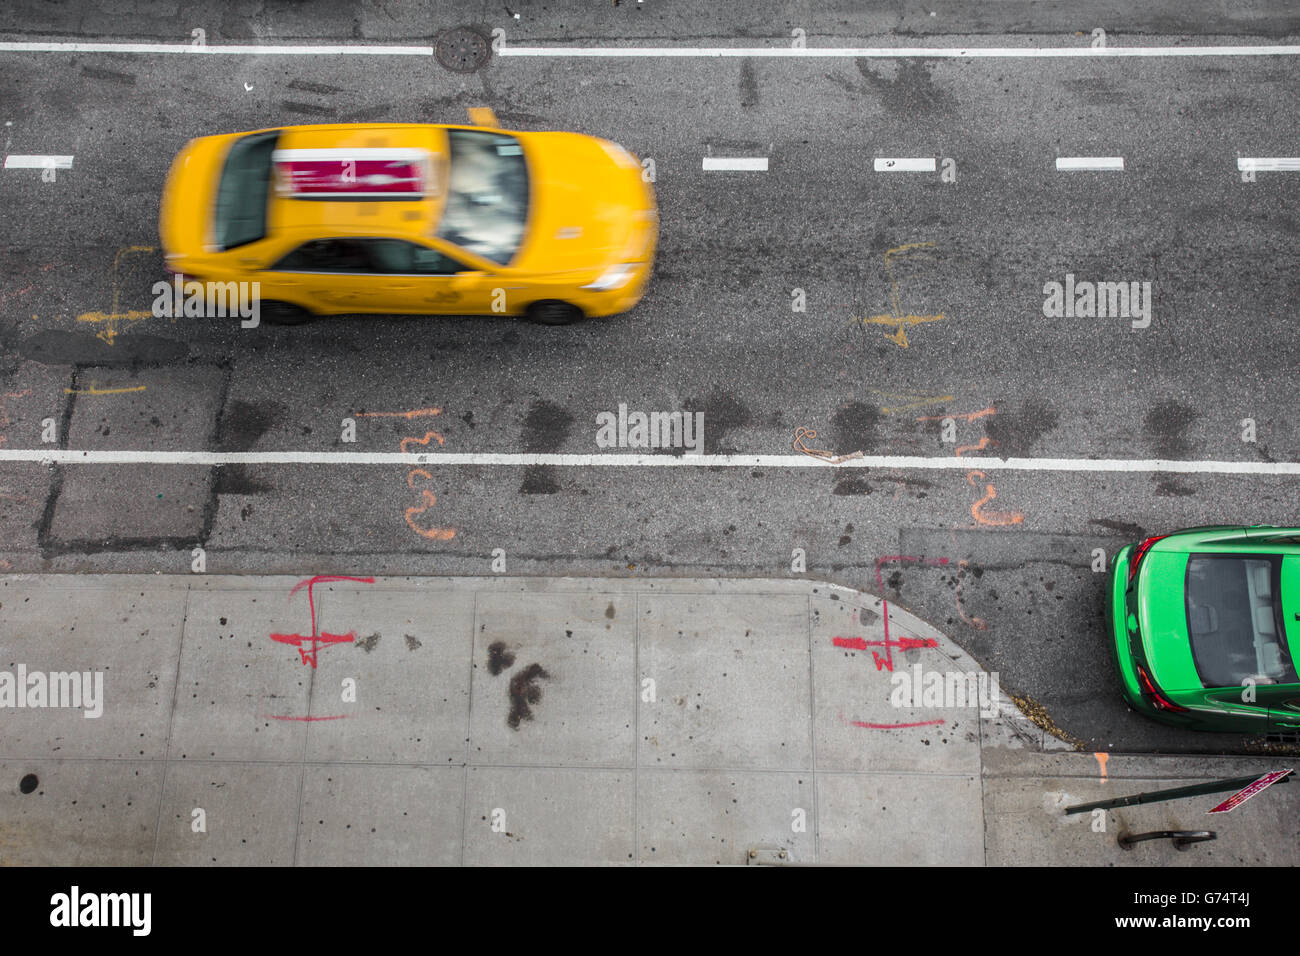 Overhead view of New York City street scene with Yellow taxi cab and green car Stock Photo